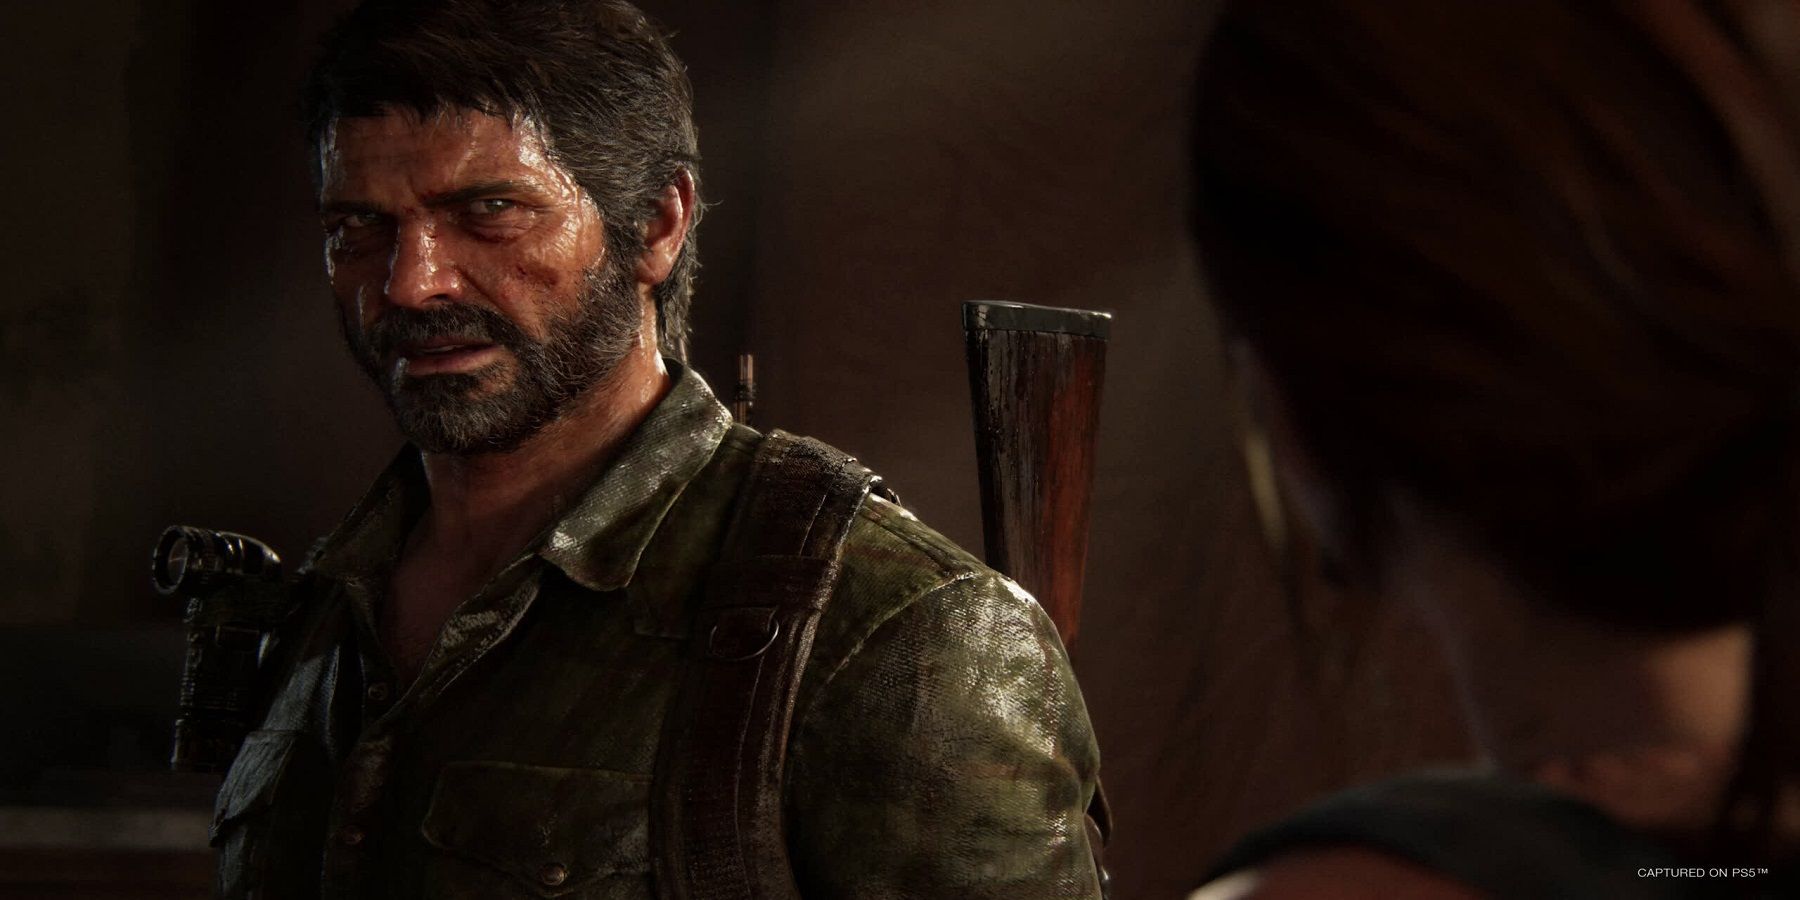 The Last of Us: Where Will Joel's Story Go?